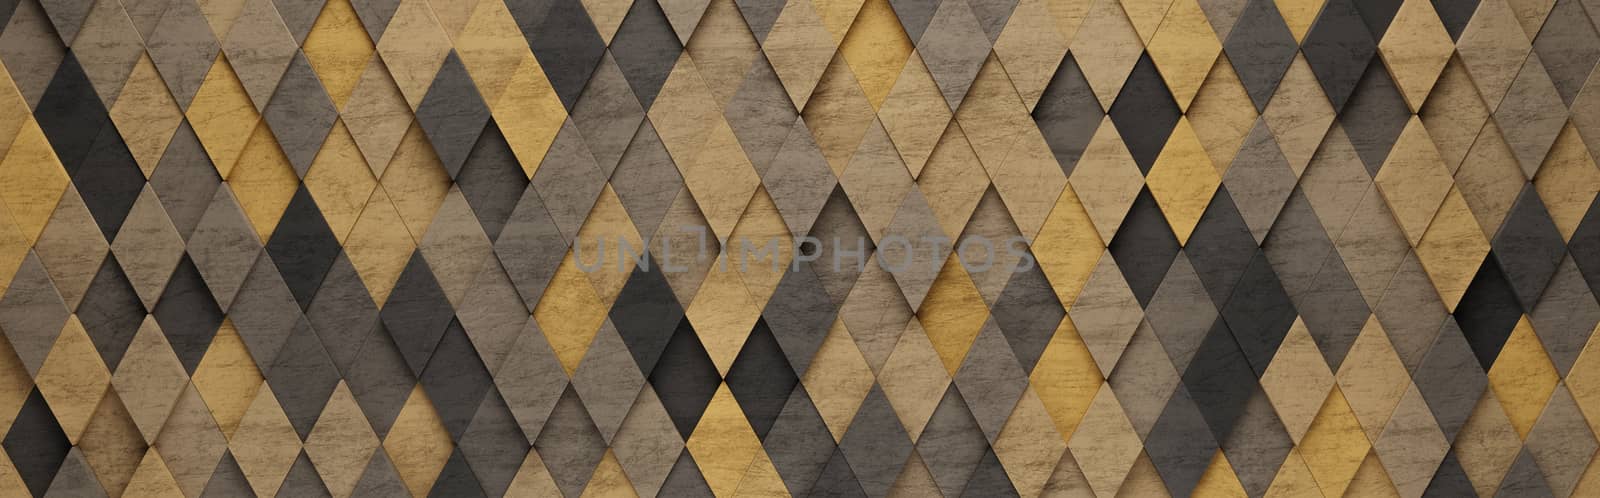 Wall of Yellow Rhombus Tiles Arranged in Random Height 3D Pattern Background Illustration